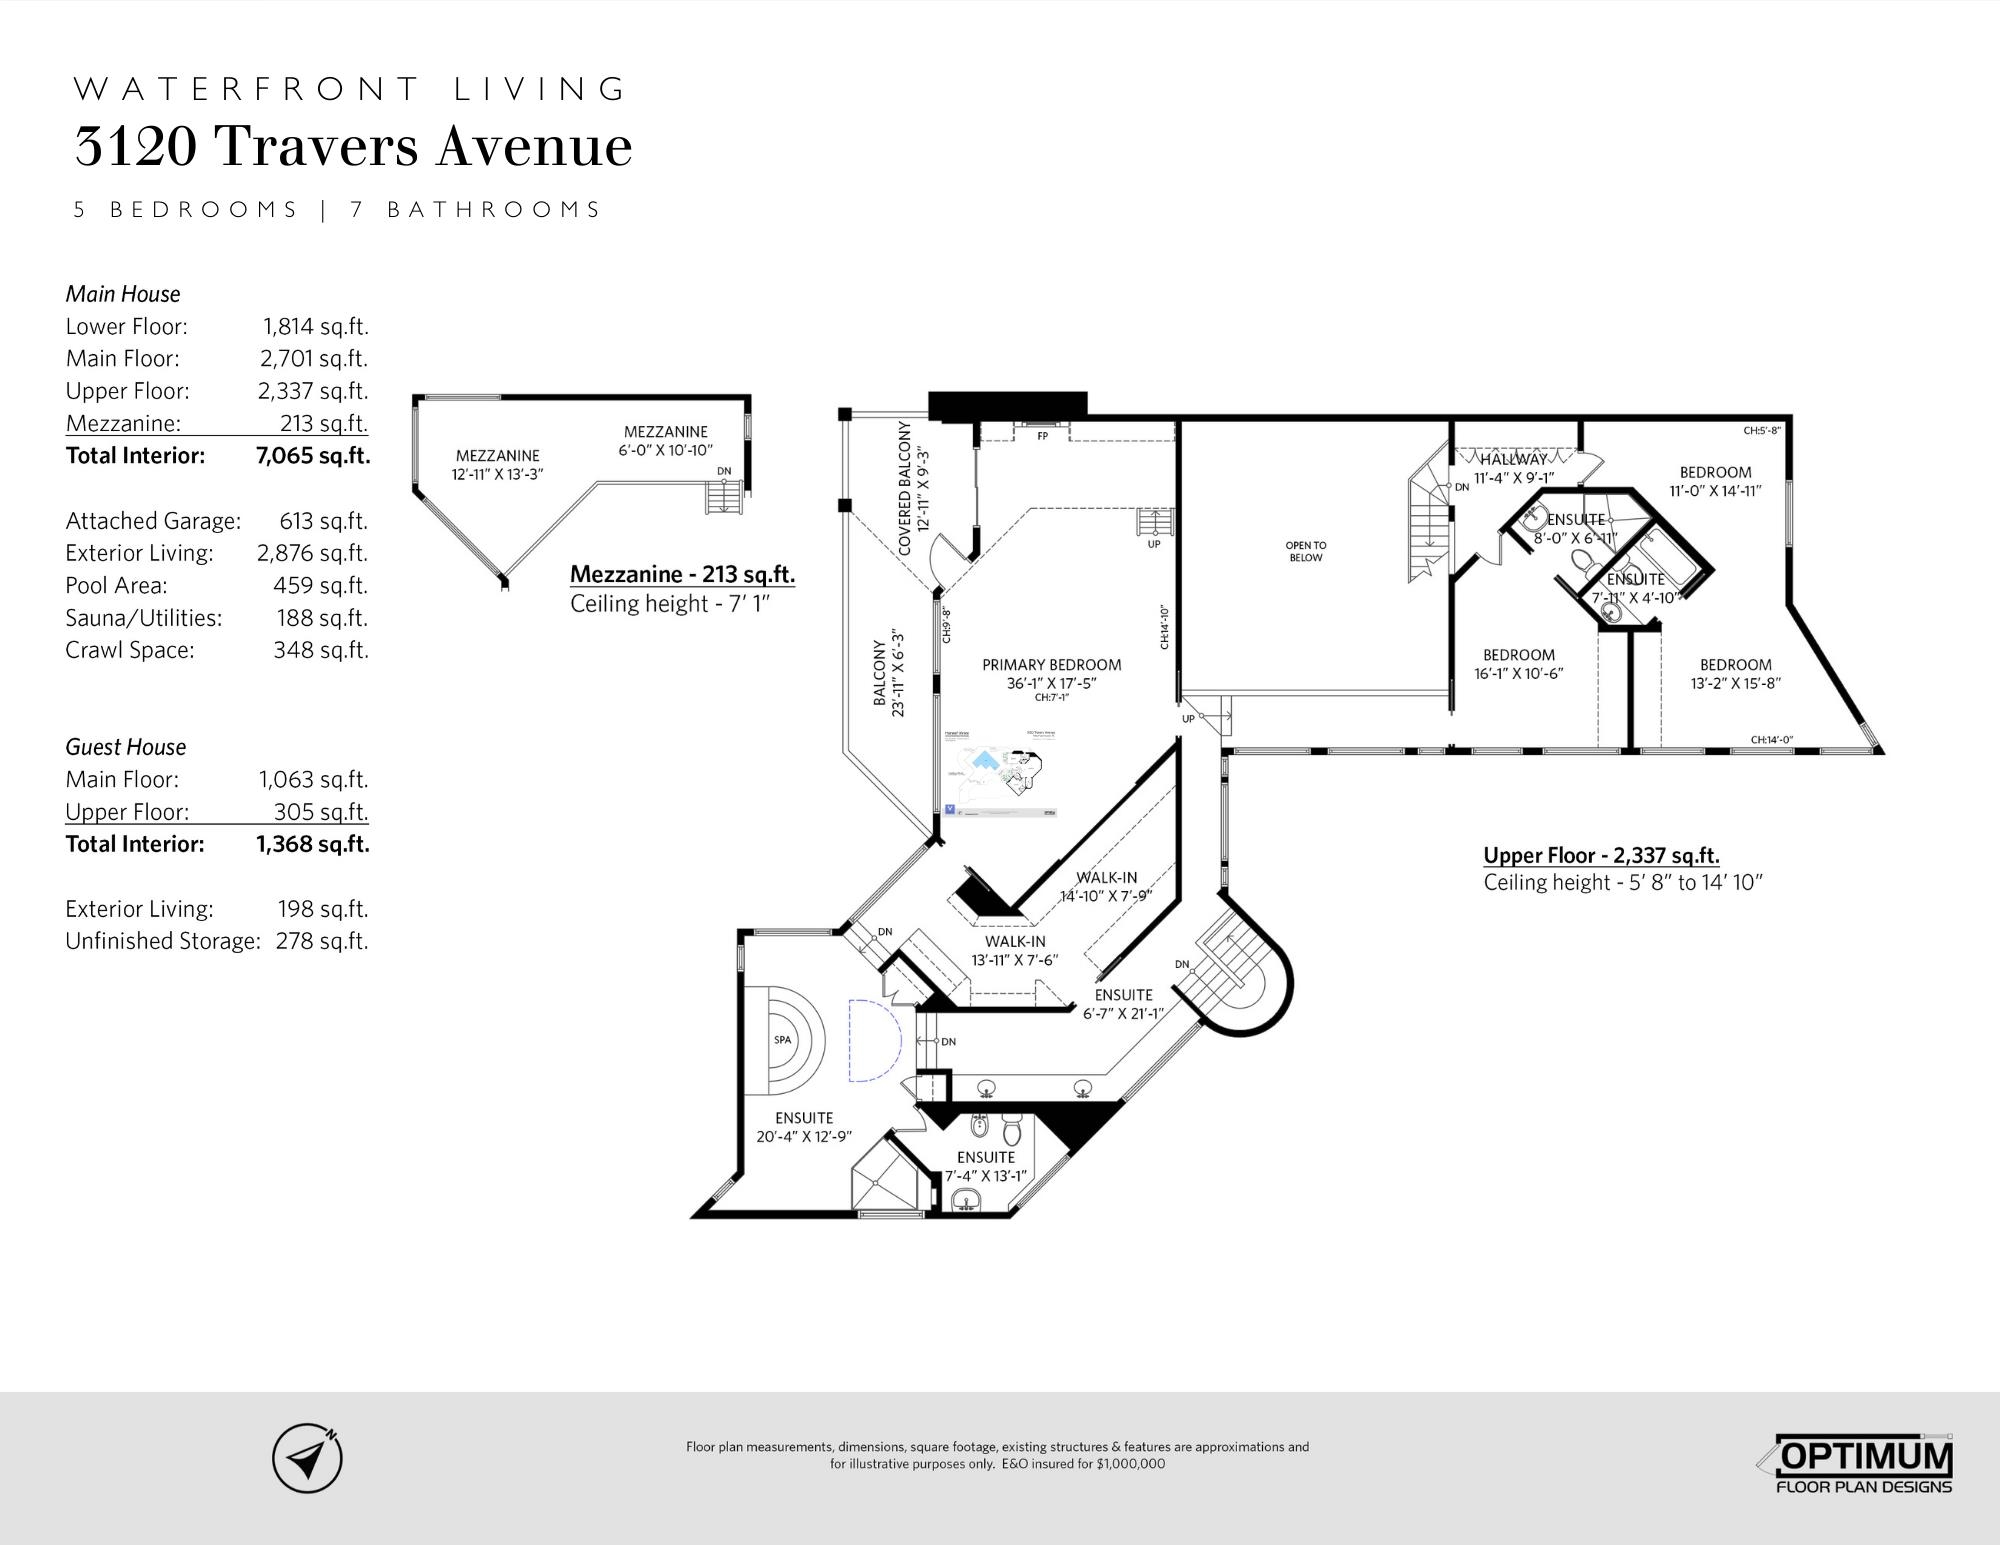 Listing image of 3120 TRAVERS AVENUE